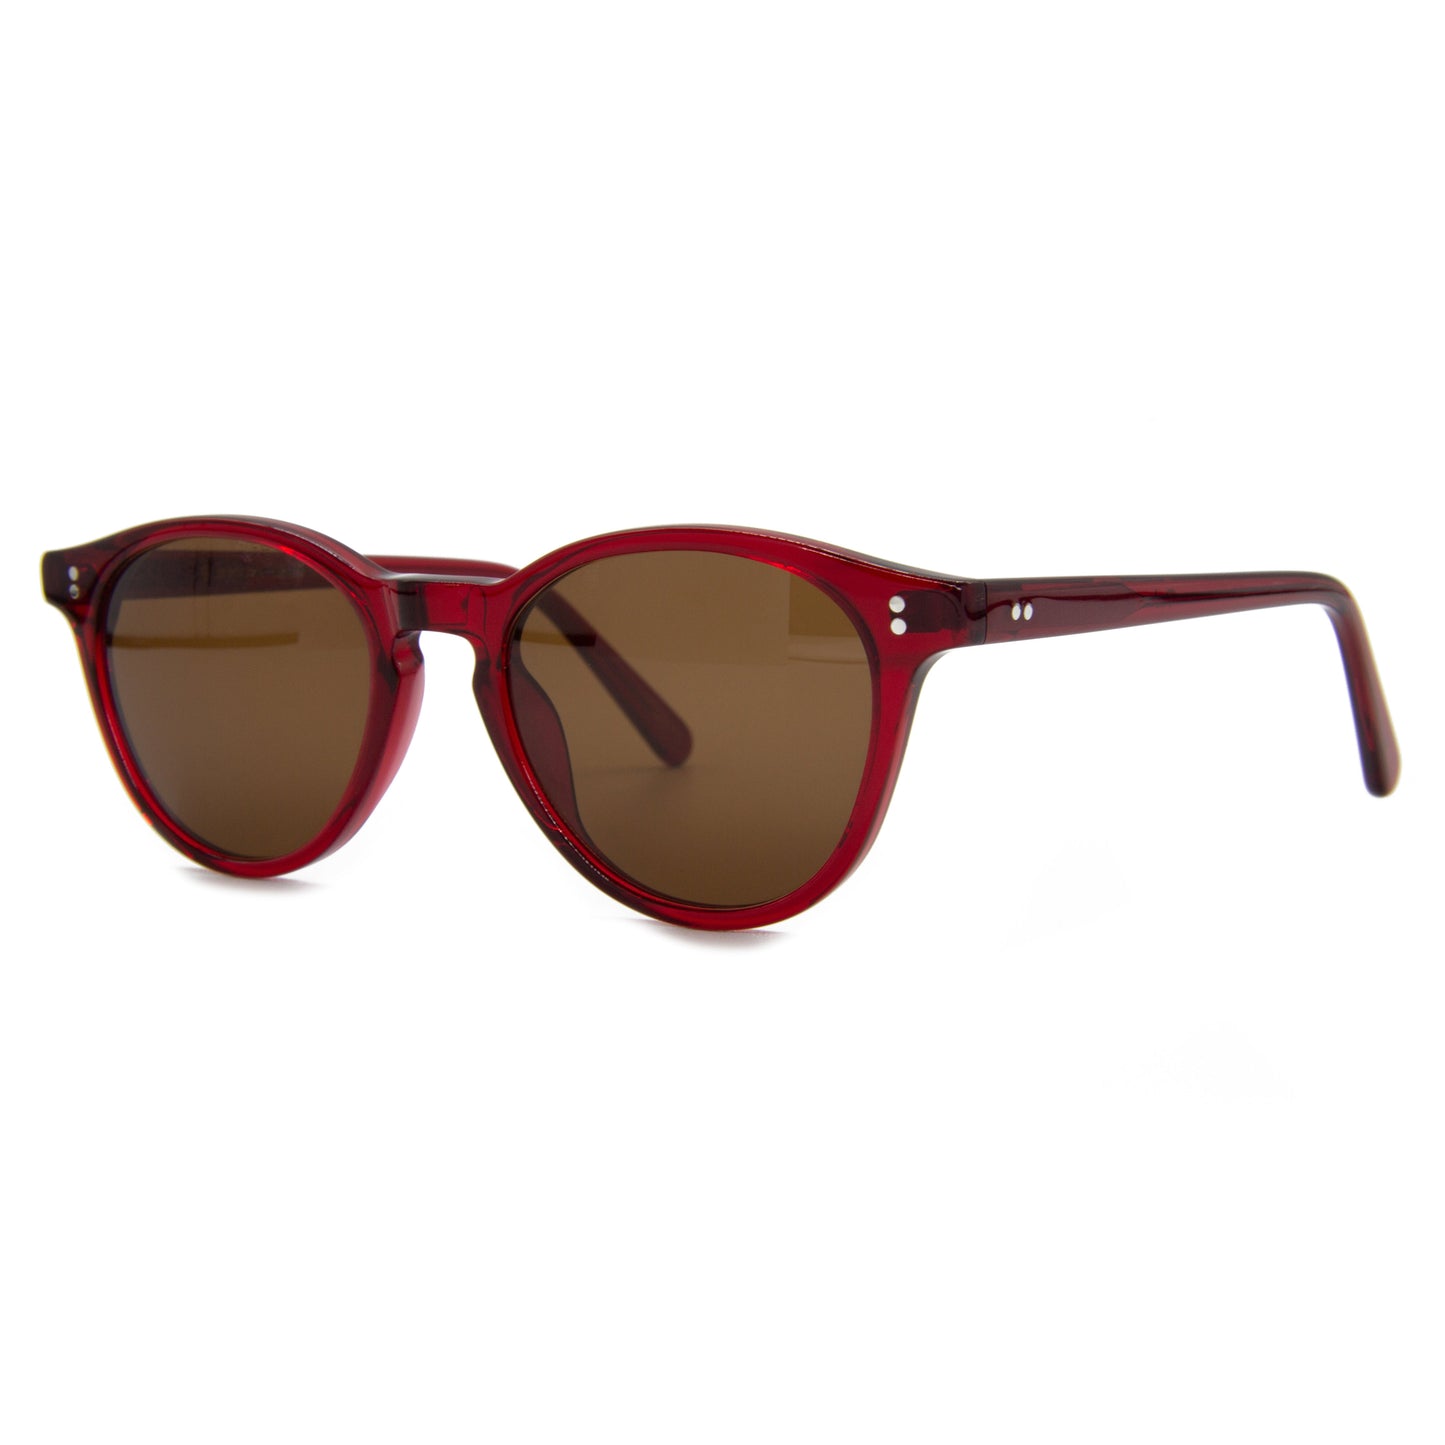 3 brothers - Chantal - Red - Prescription Sunglasses - Side